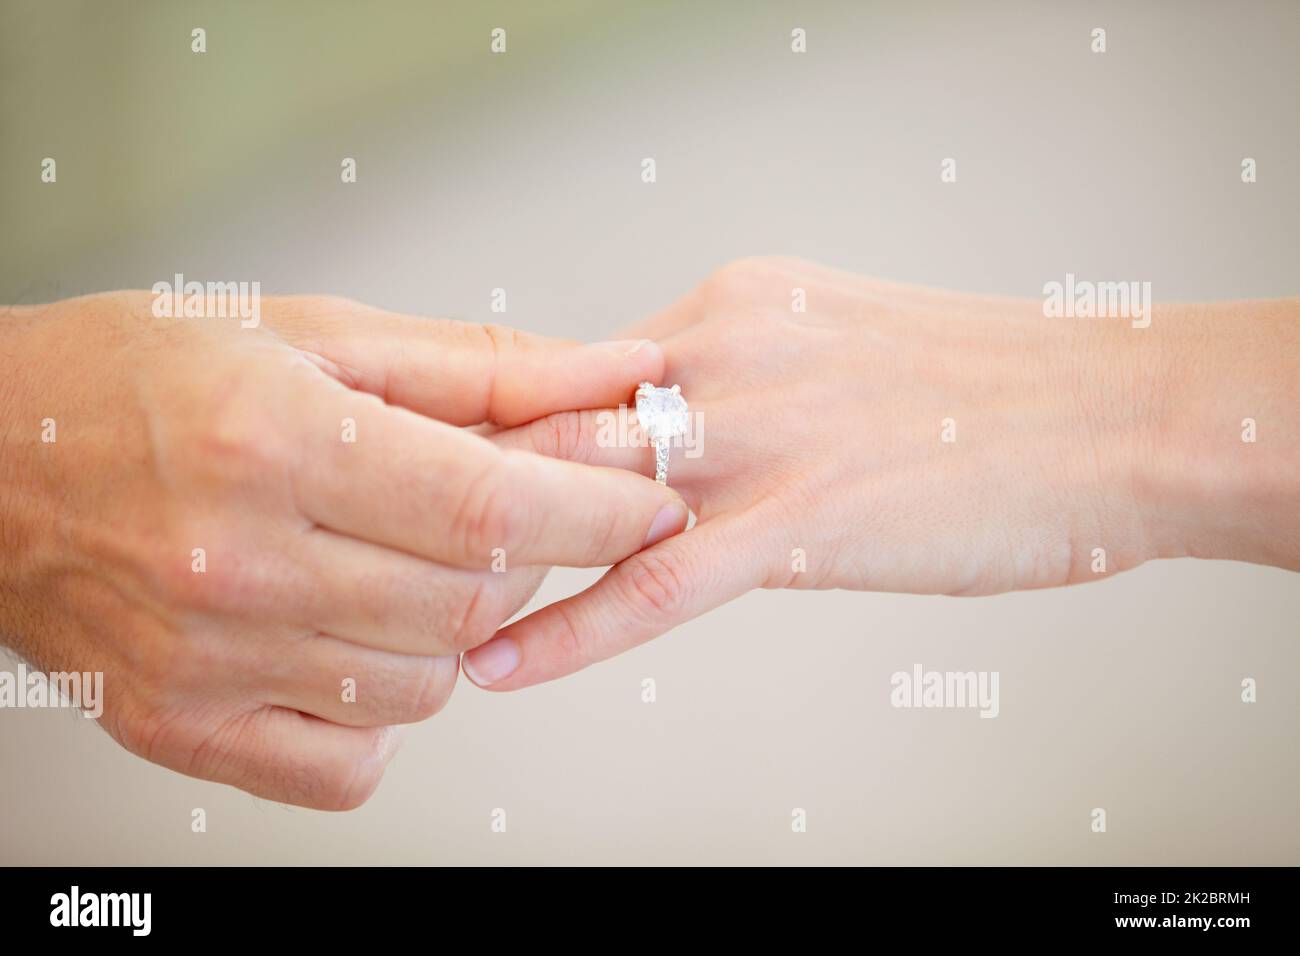 Image of Girl Hand Holding Ring Behind Light Rays Background, Beauty  Fashion Commercial Image.-DD298012-Picxy